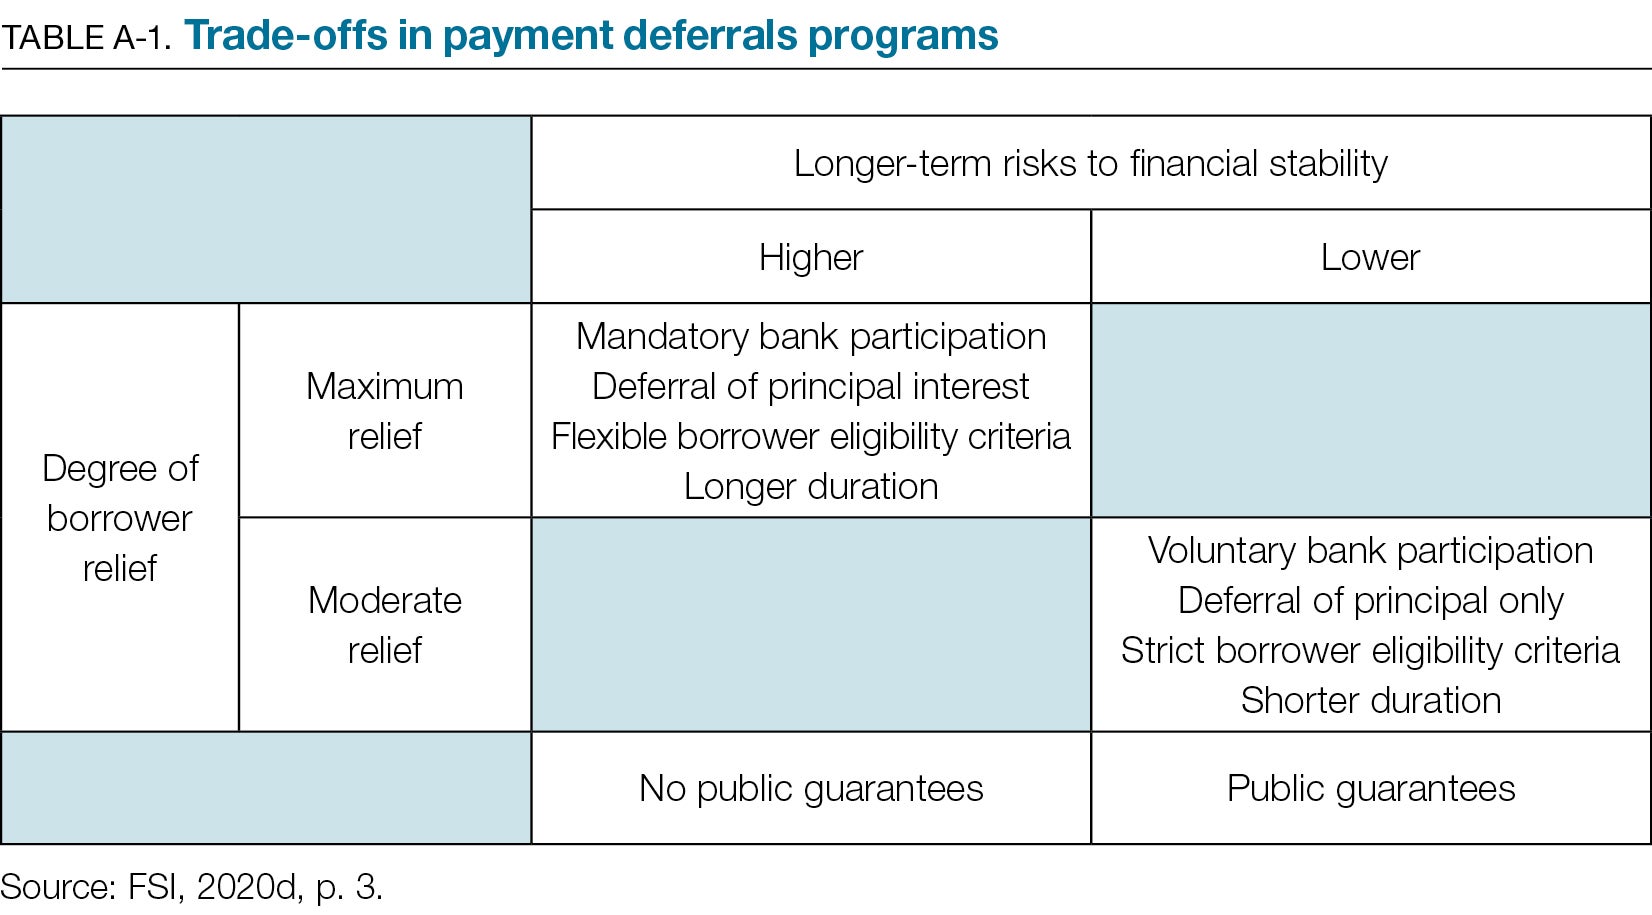 TABLE A-1. Trade-offs in payment deferrals programs